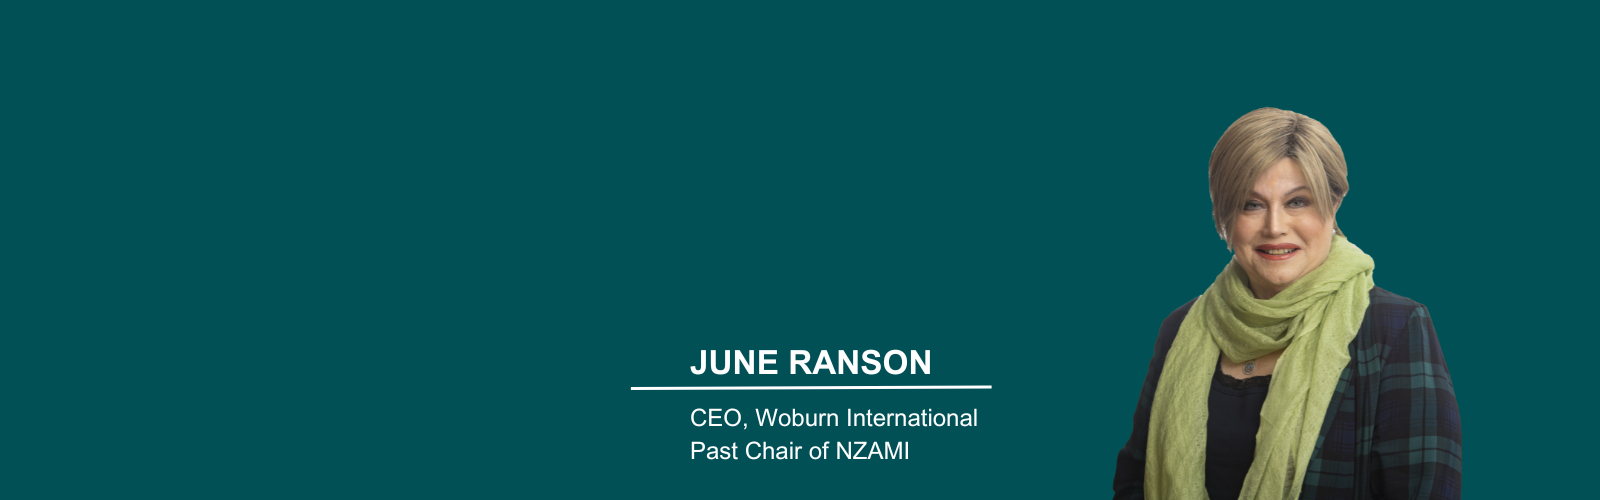 June’s Opinion Piece, Investor Visa NZ changes bring opportunities for applicants